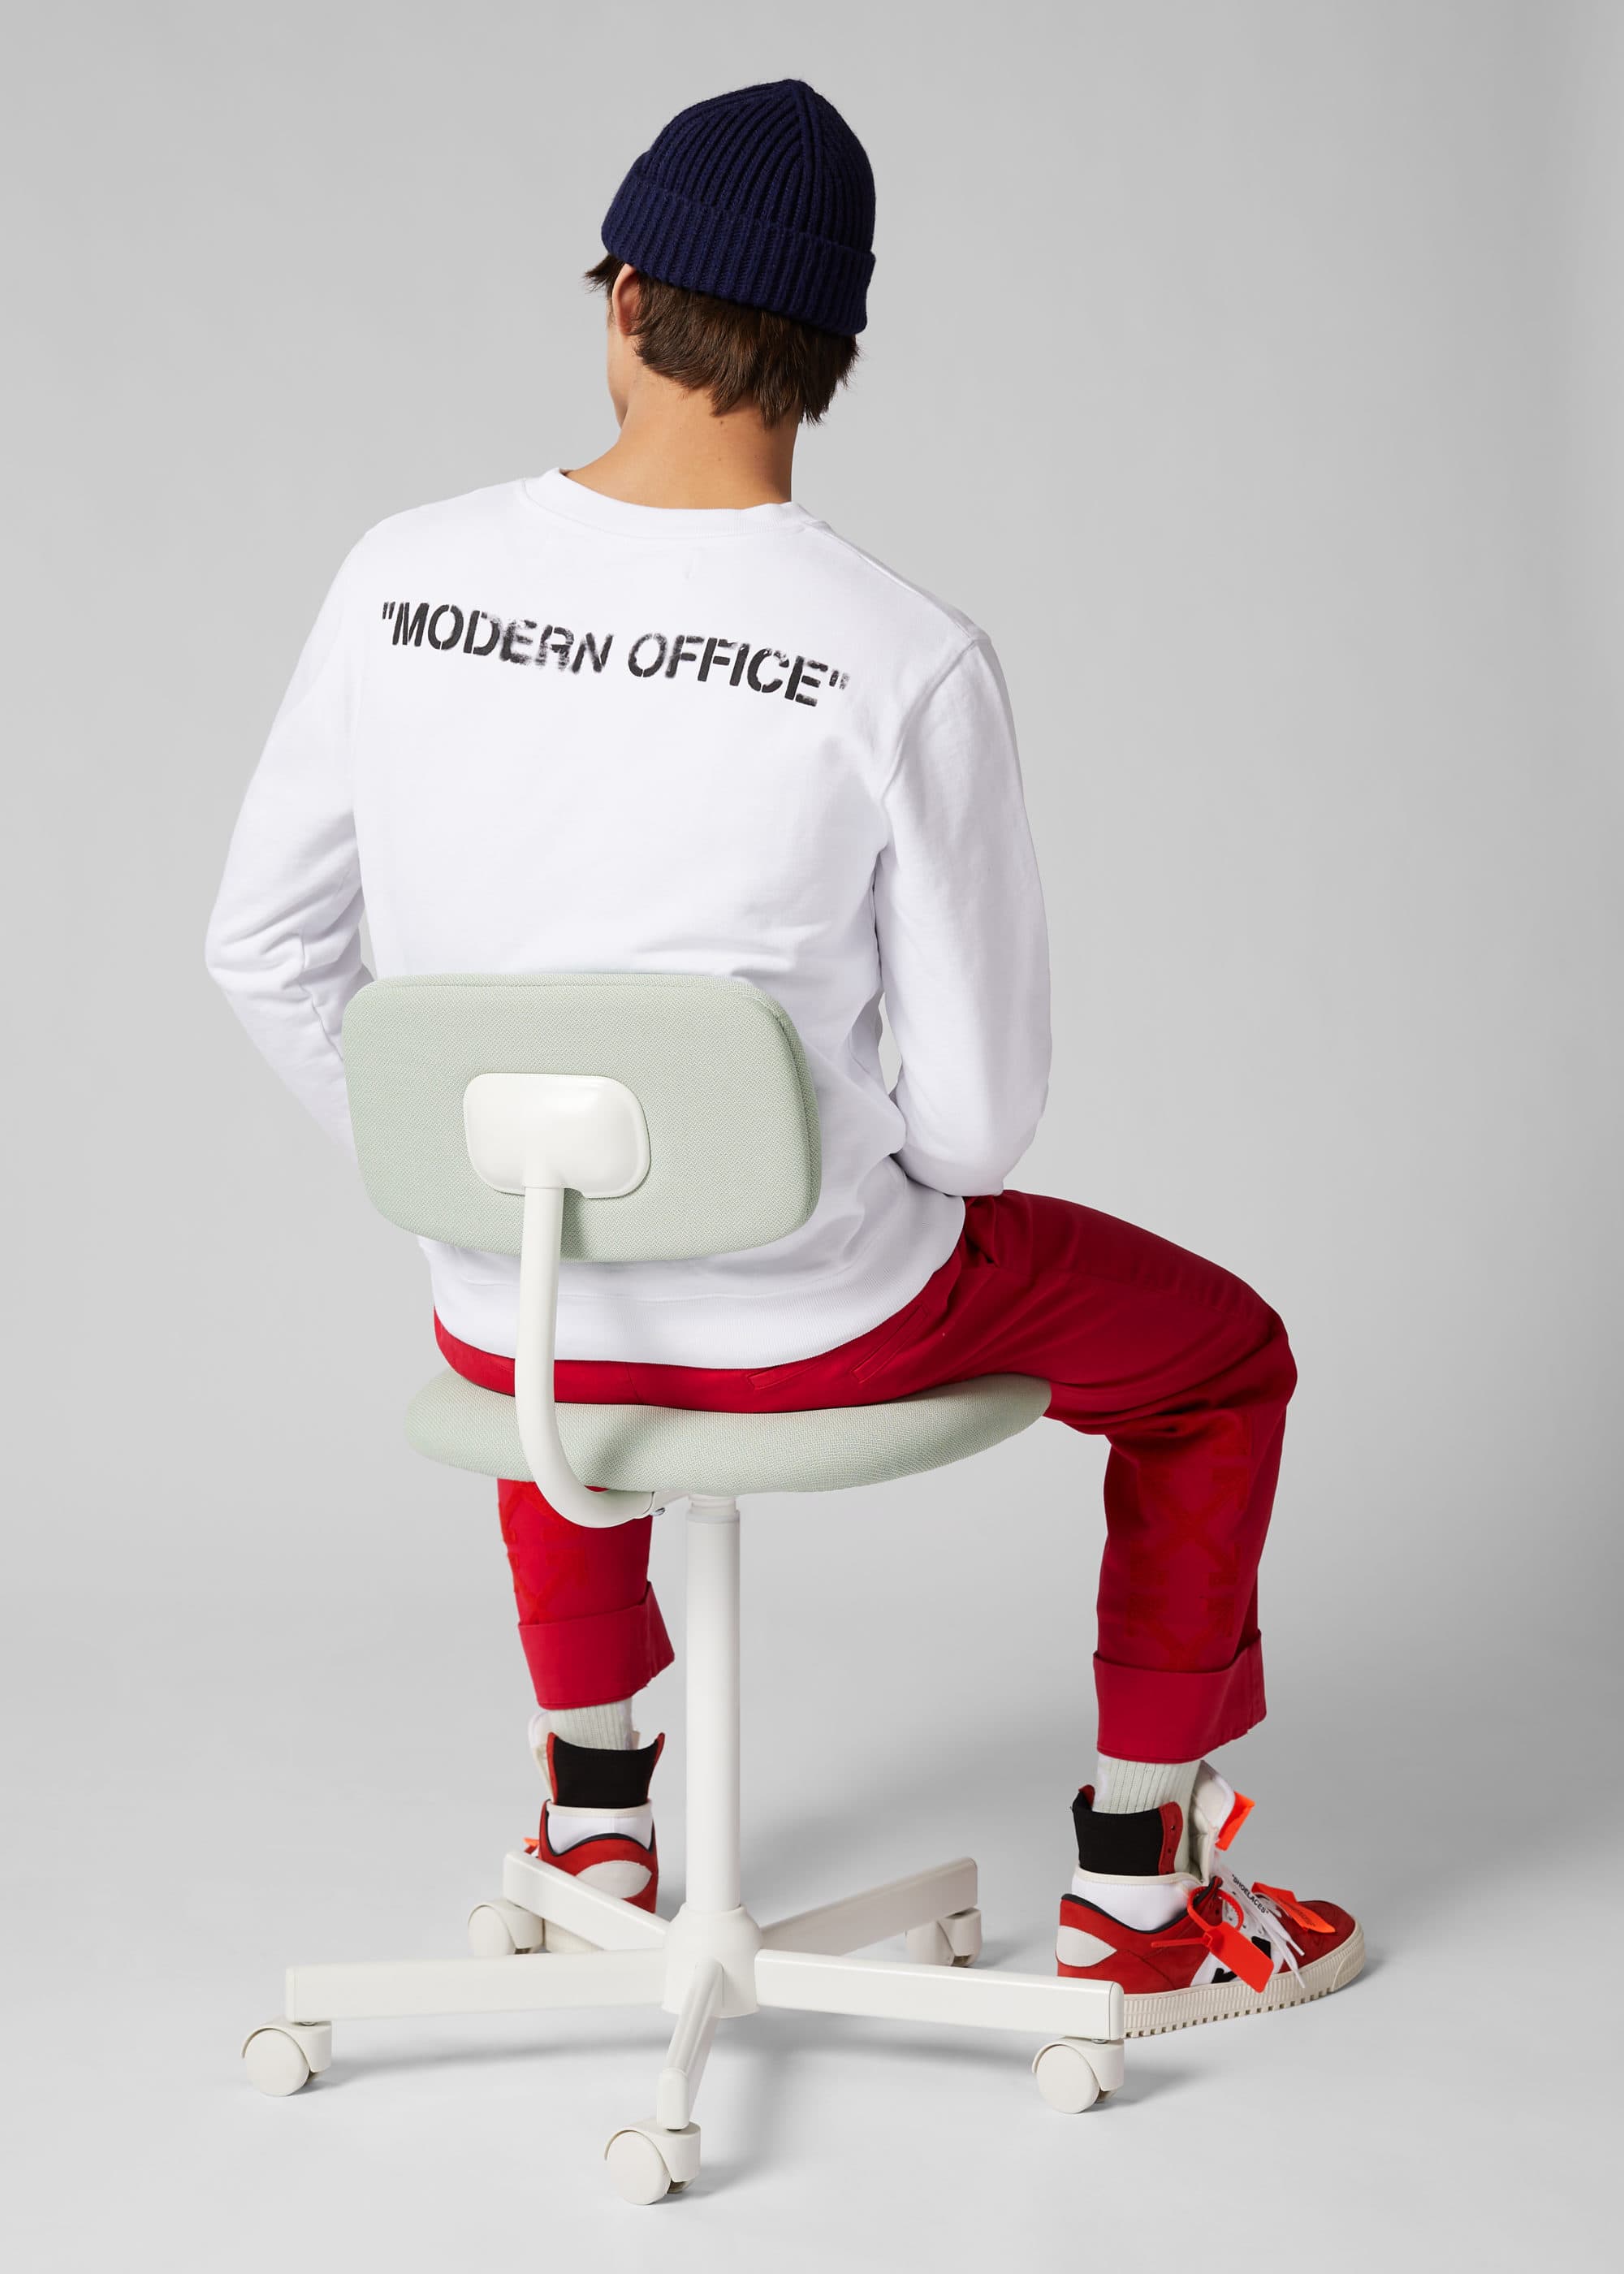 Off-White’s Virgil Abloh introduces the brand’s biggest collaborative collection to date